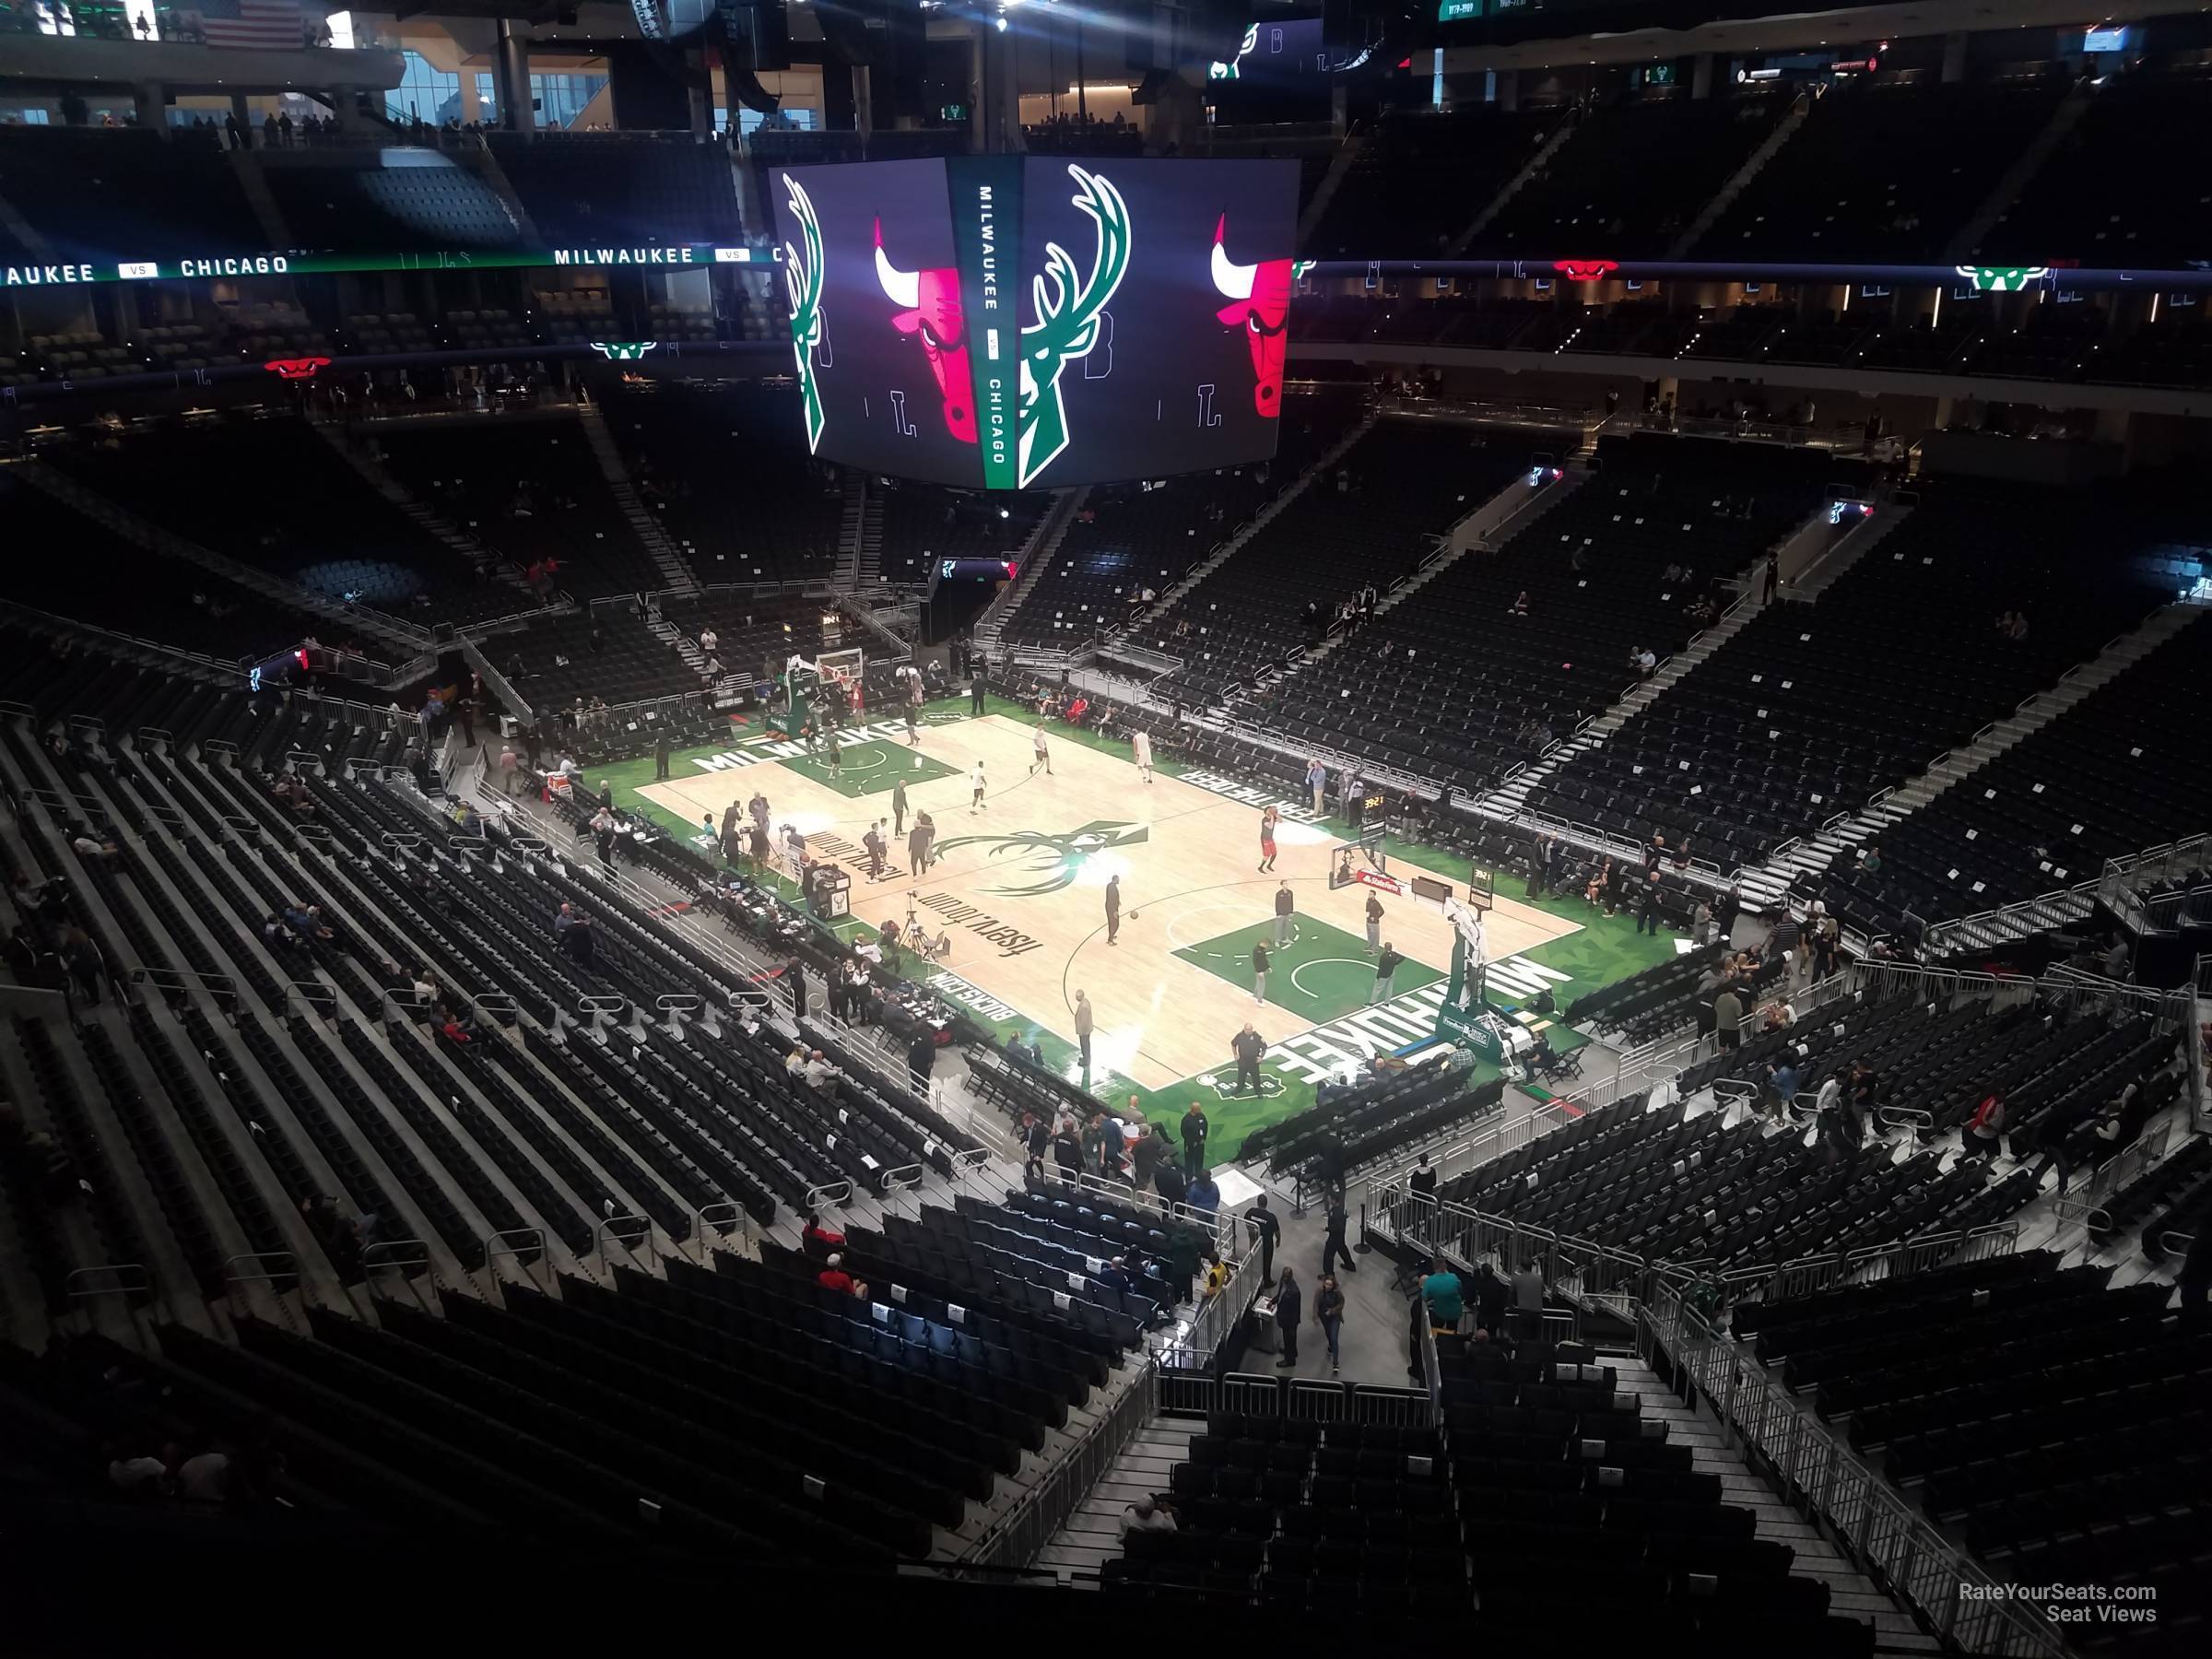 section 218, row 3 seat view  for basketball - fiserv forum